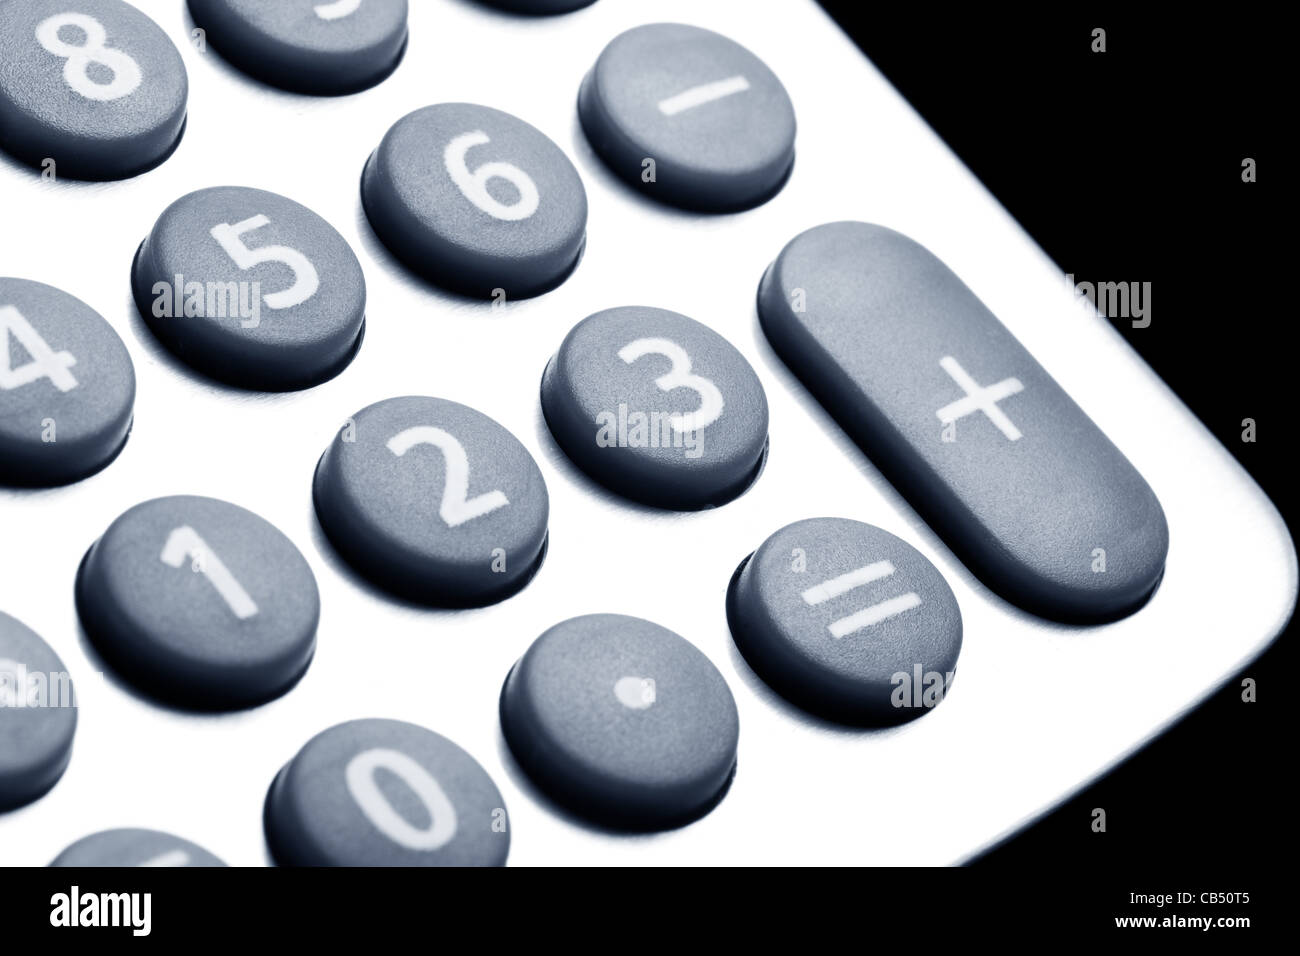 calculator, business concept of Finance Stock Photo